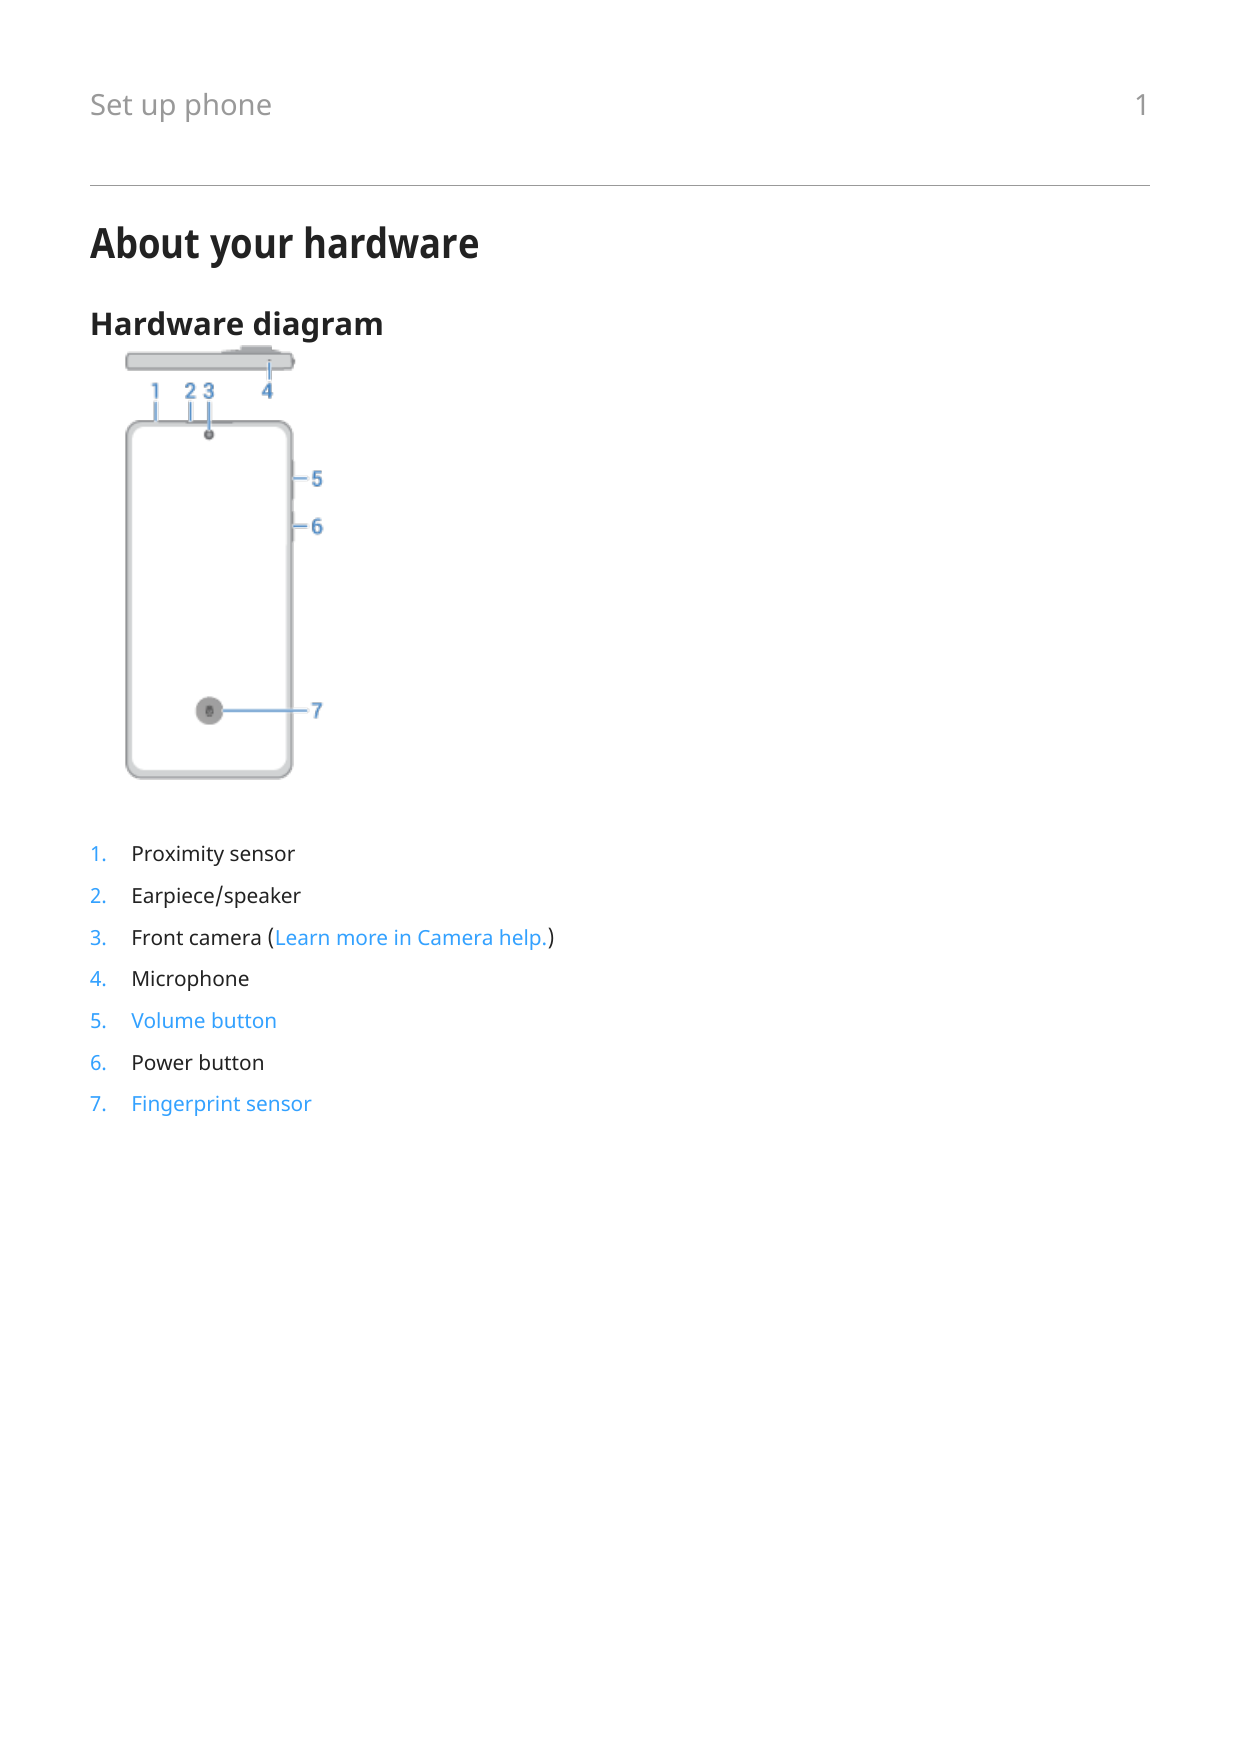 Set up phoneAbout your hardwareHardware diagram1.Proximity sensor2.Earpiece/speaker3.Front camera (Learn more in Camera help.)4.